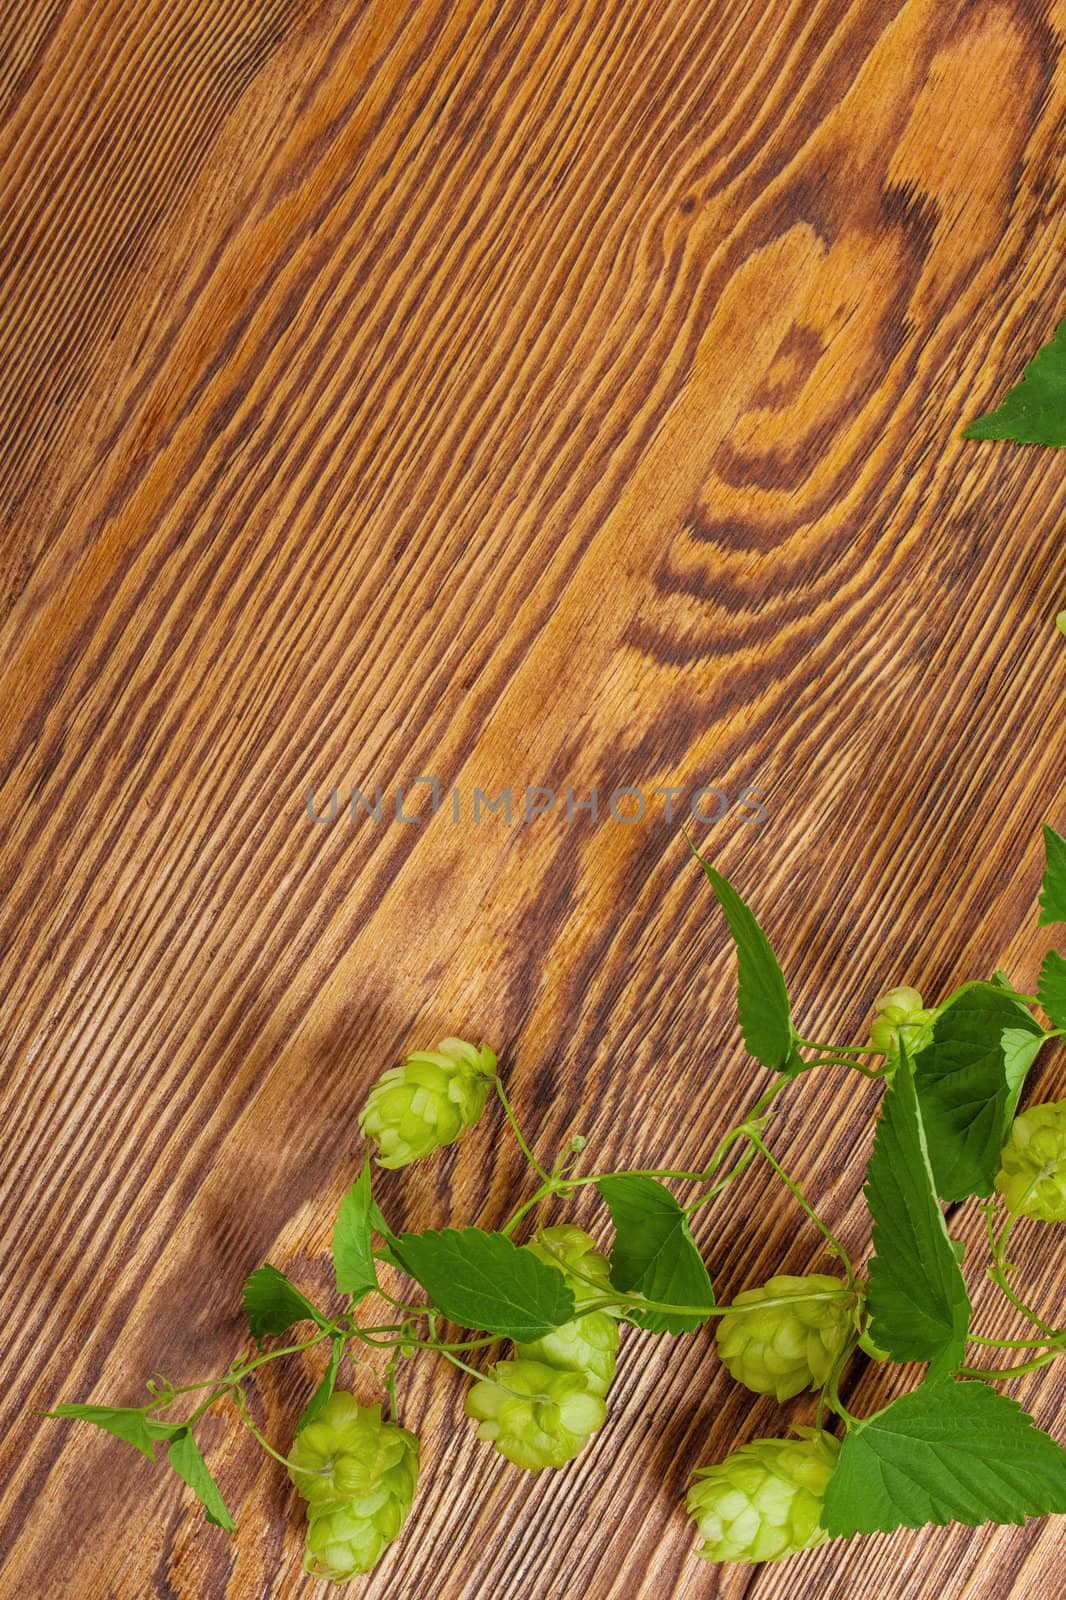 Image of a hop plant on a wooden table. Close up